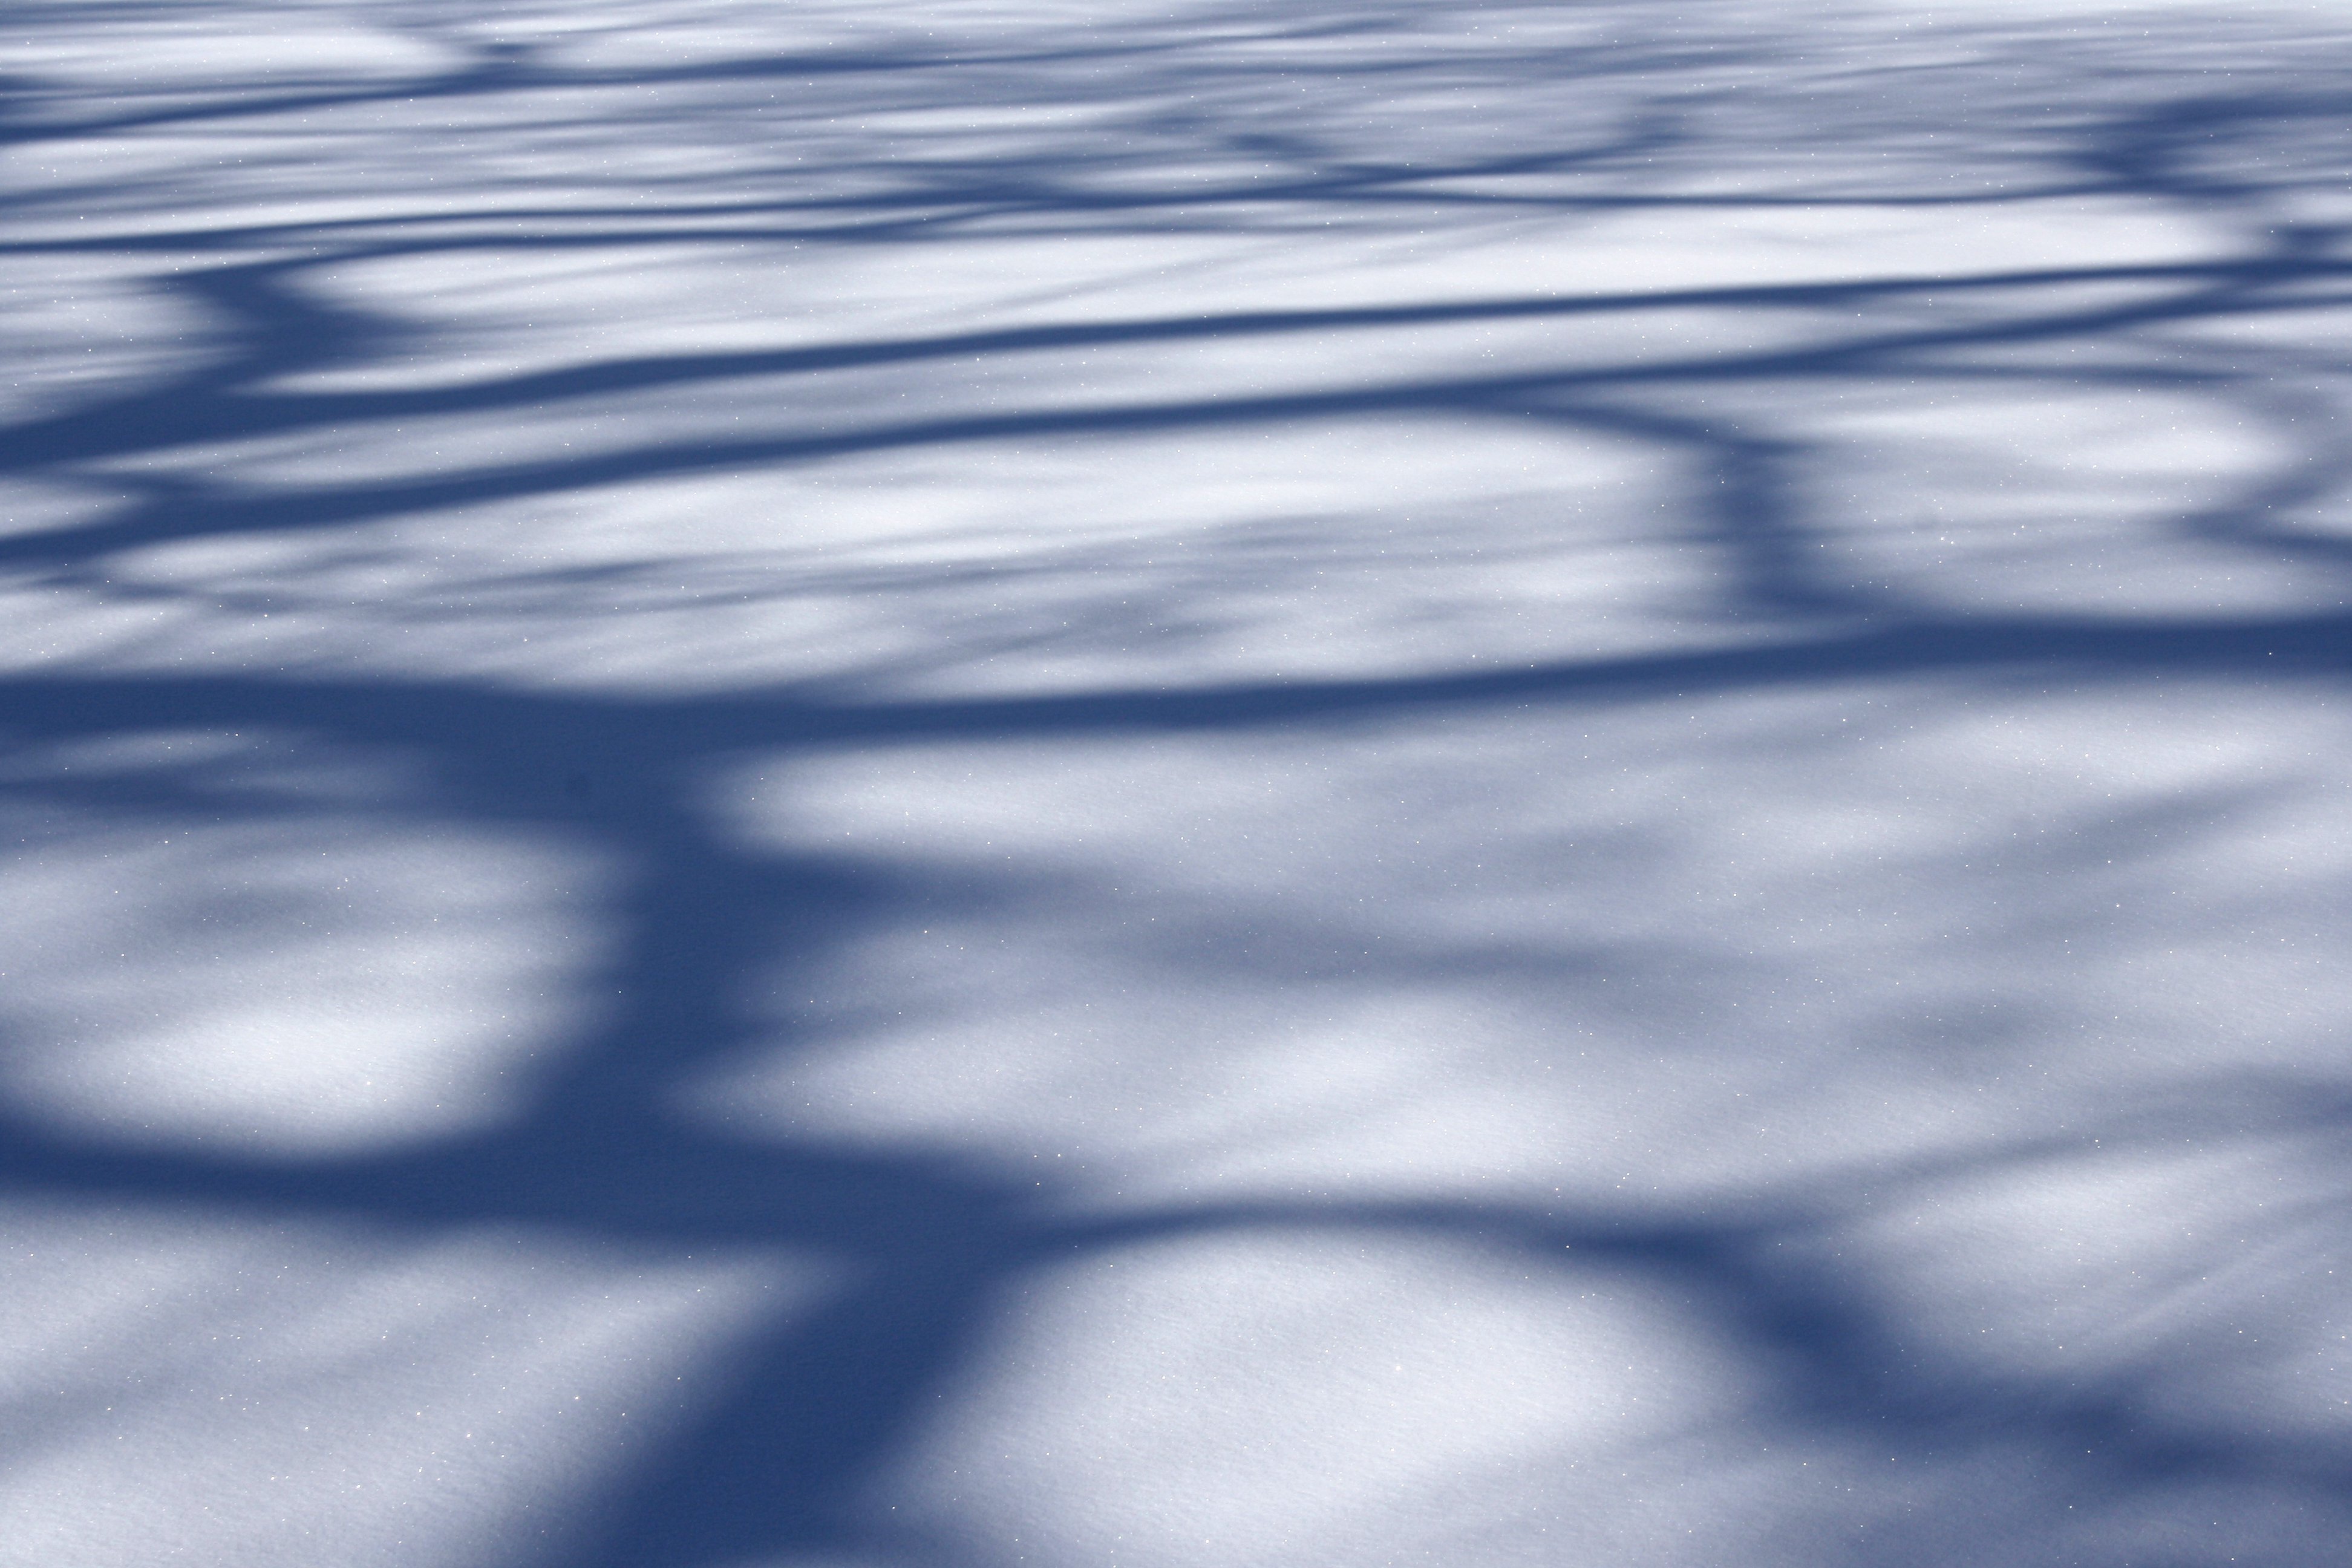 Tree Shadow Patterns on Snow Picture | Free Photograph | Photos ...